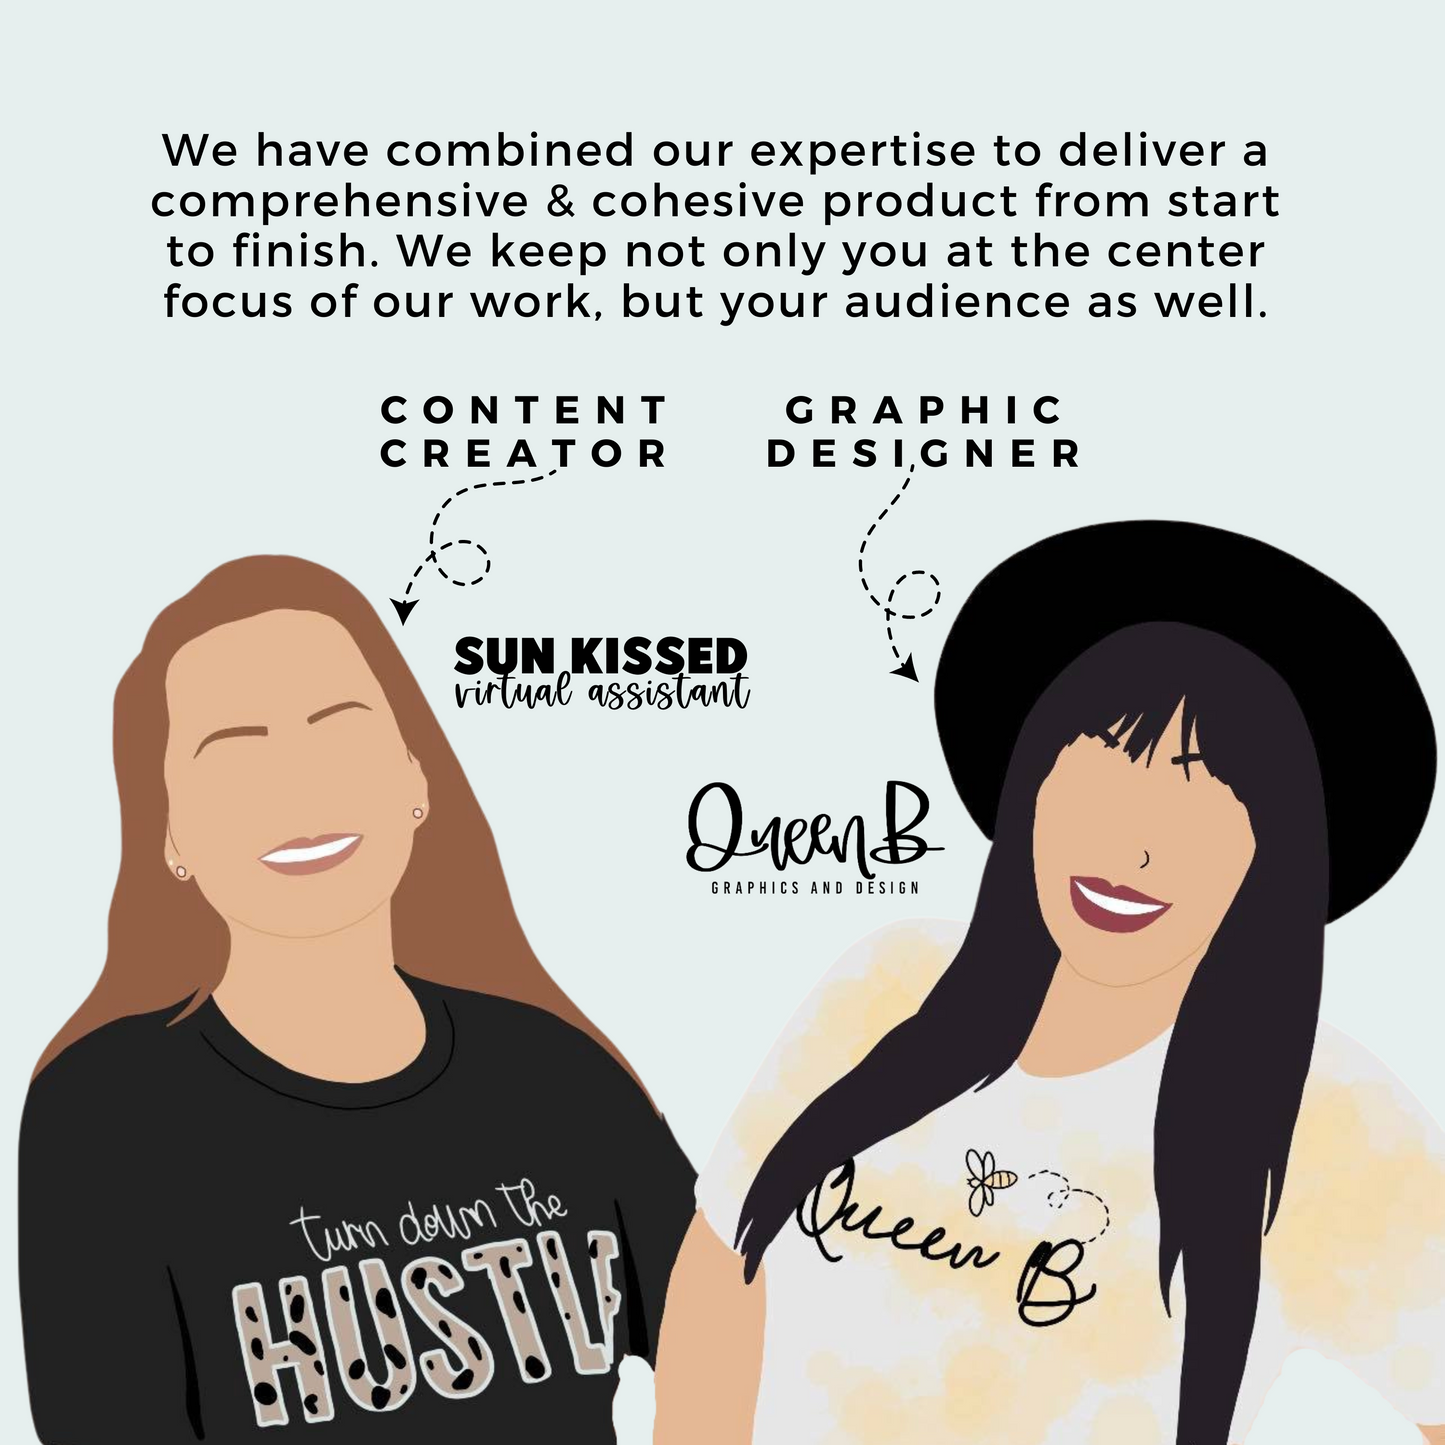 Ball Life Tee Party Planner | Sun Kissed Virtual Assistant